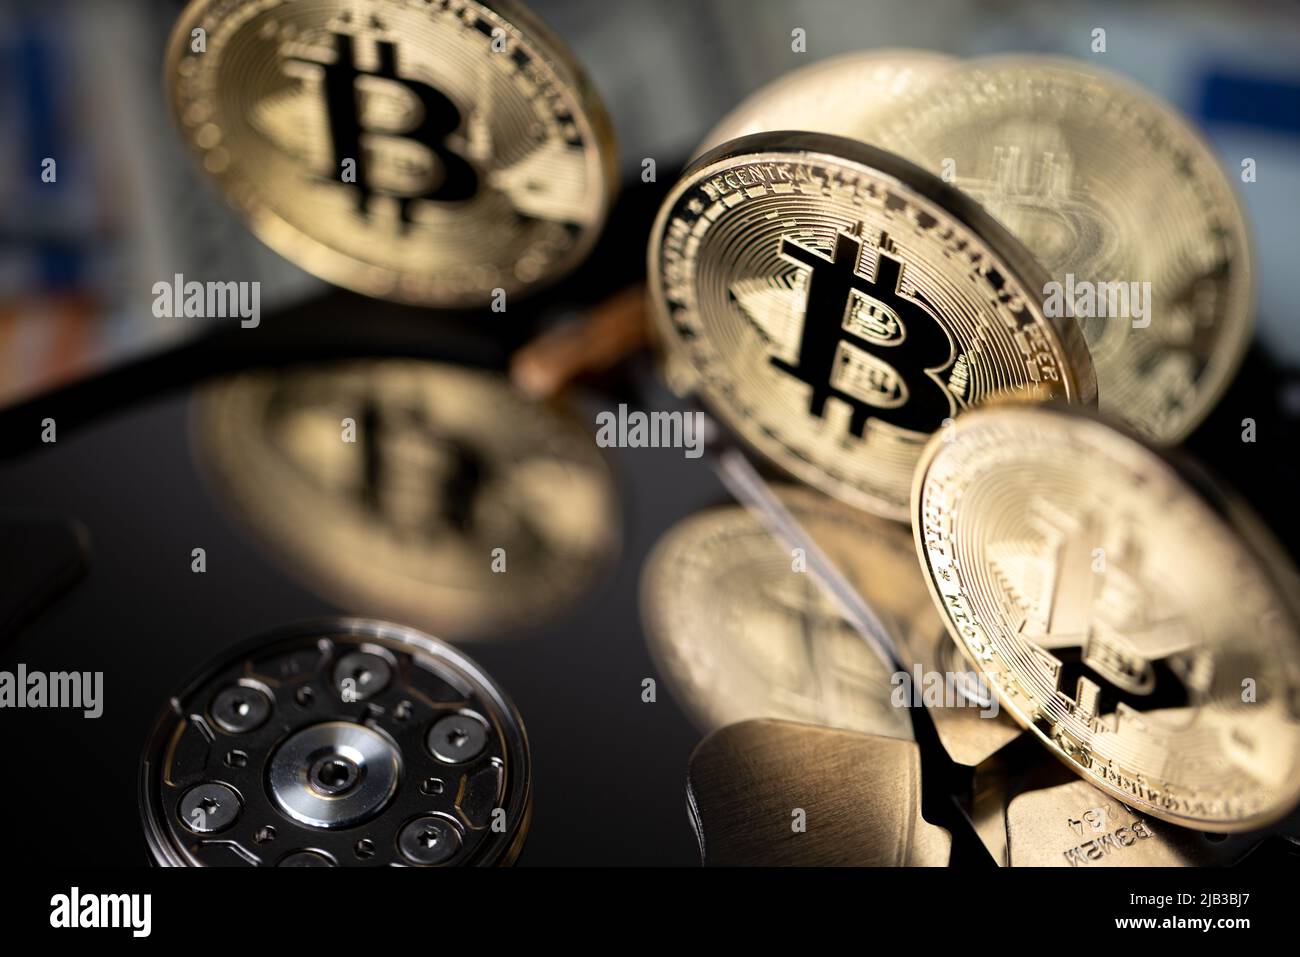 Bitcoin reflecting on HDD platter, gold BTC coins closeup view. Hard drive with crypto currency. Digital money concept Stock Photo